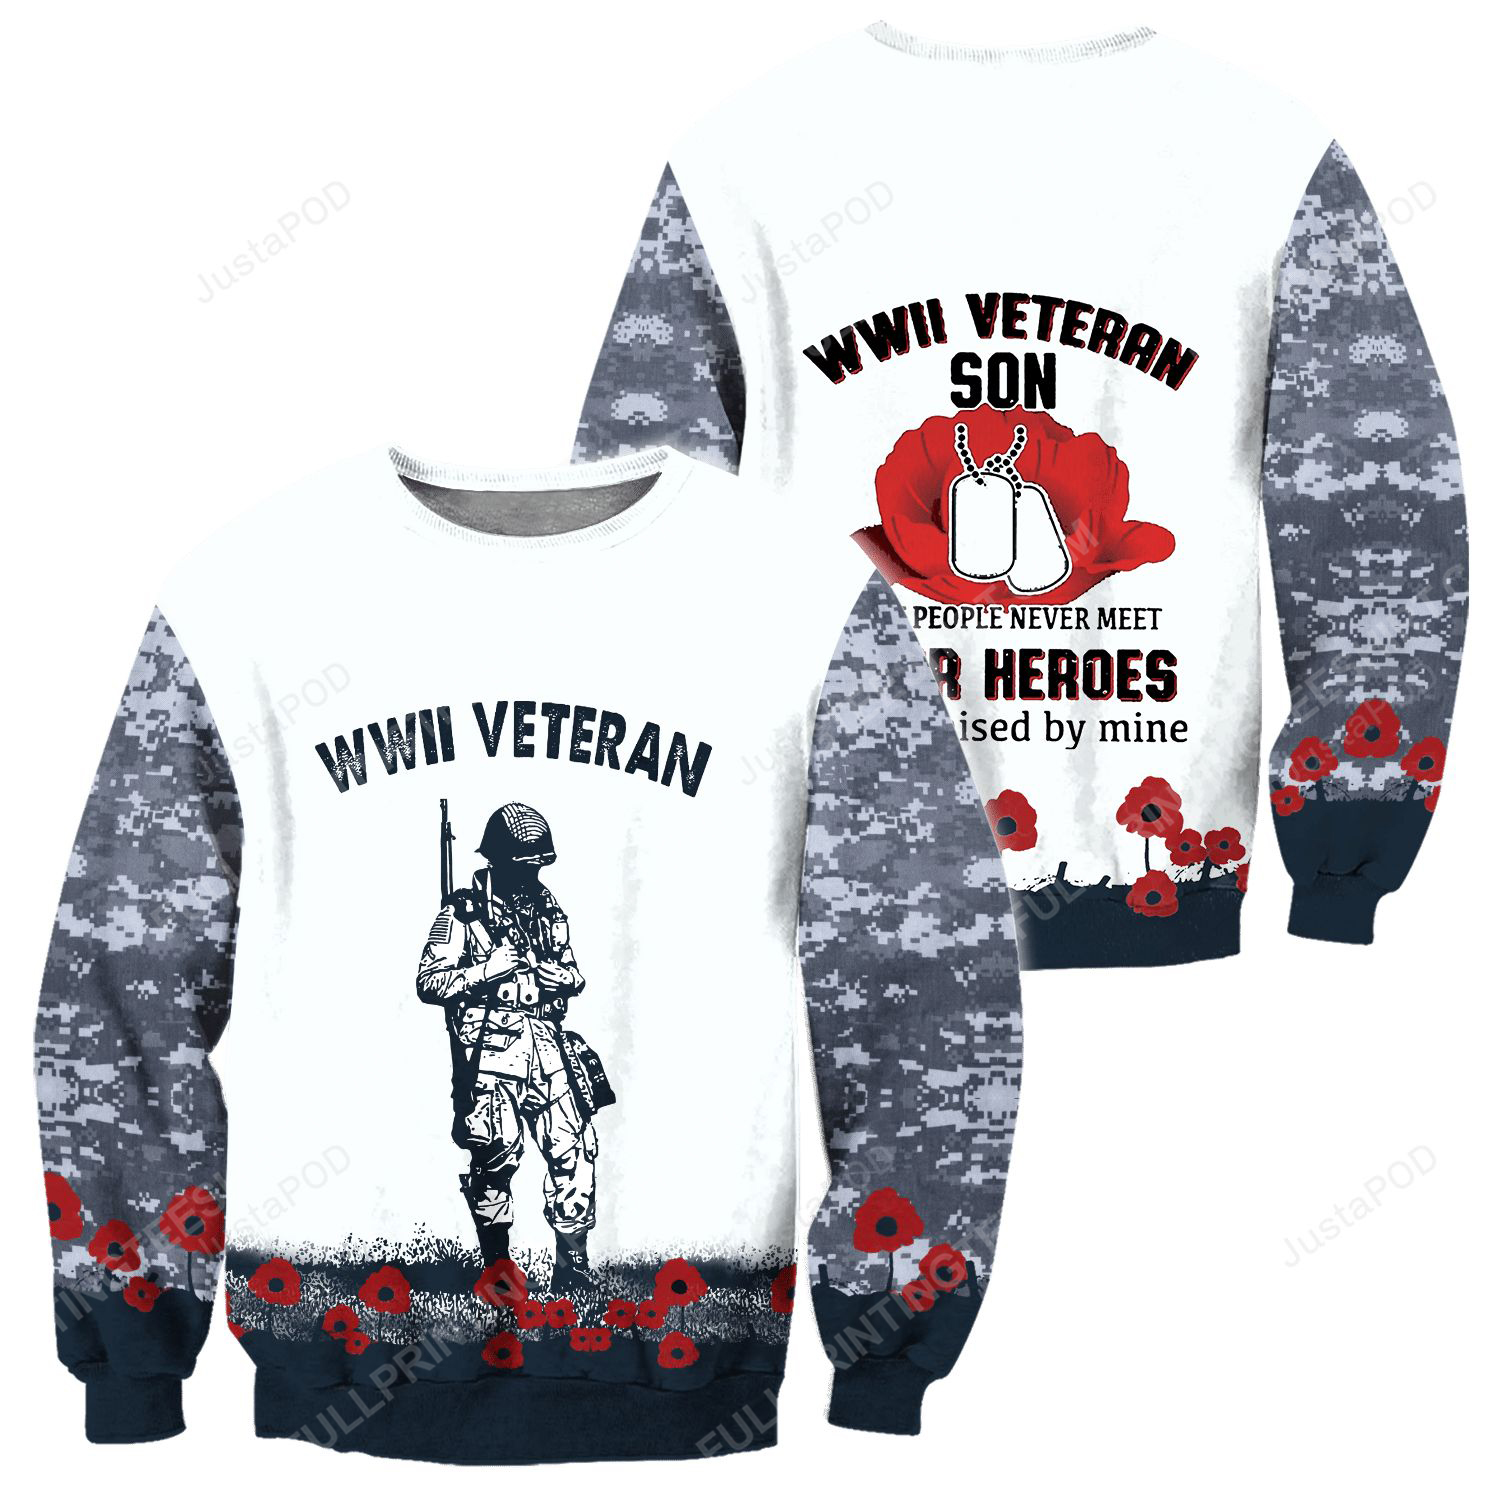 WWII veteran son most people never meet their heroes ugly christmas sweater